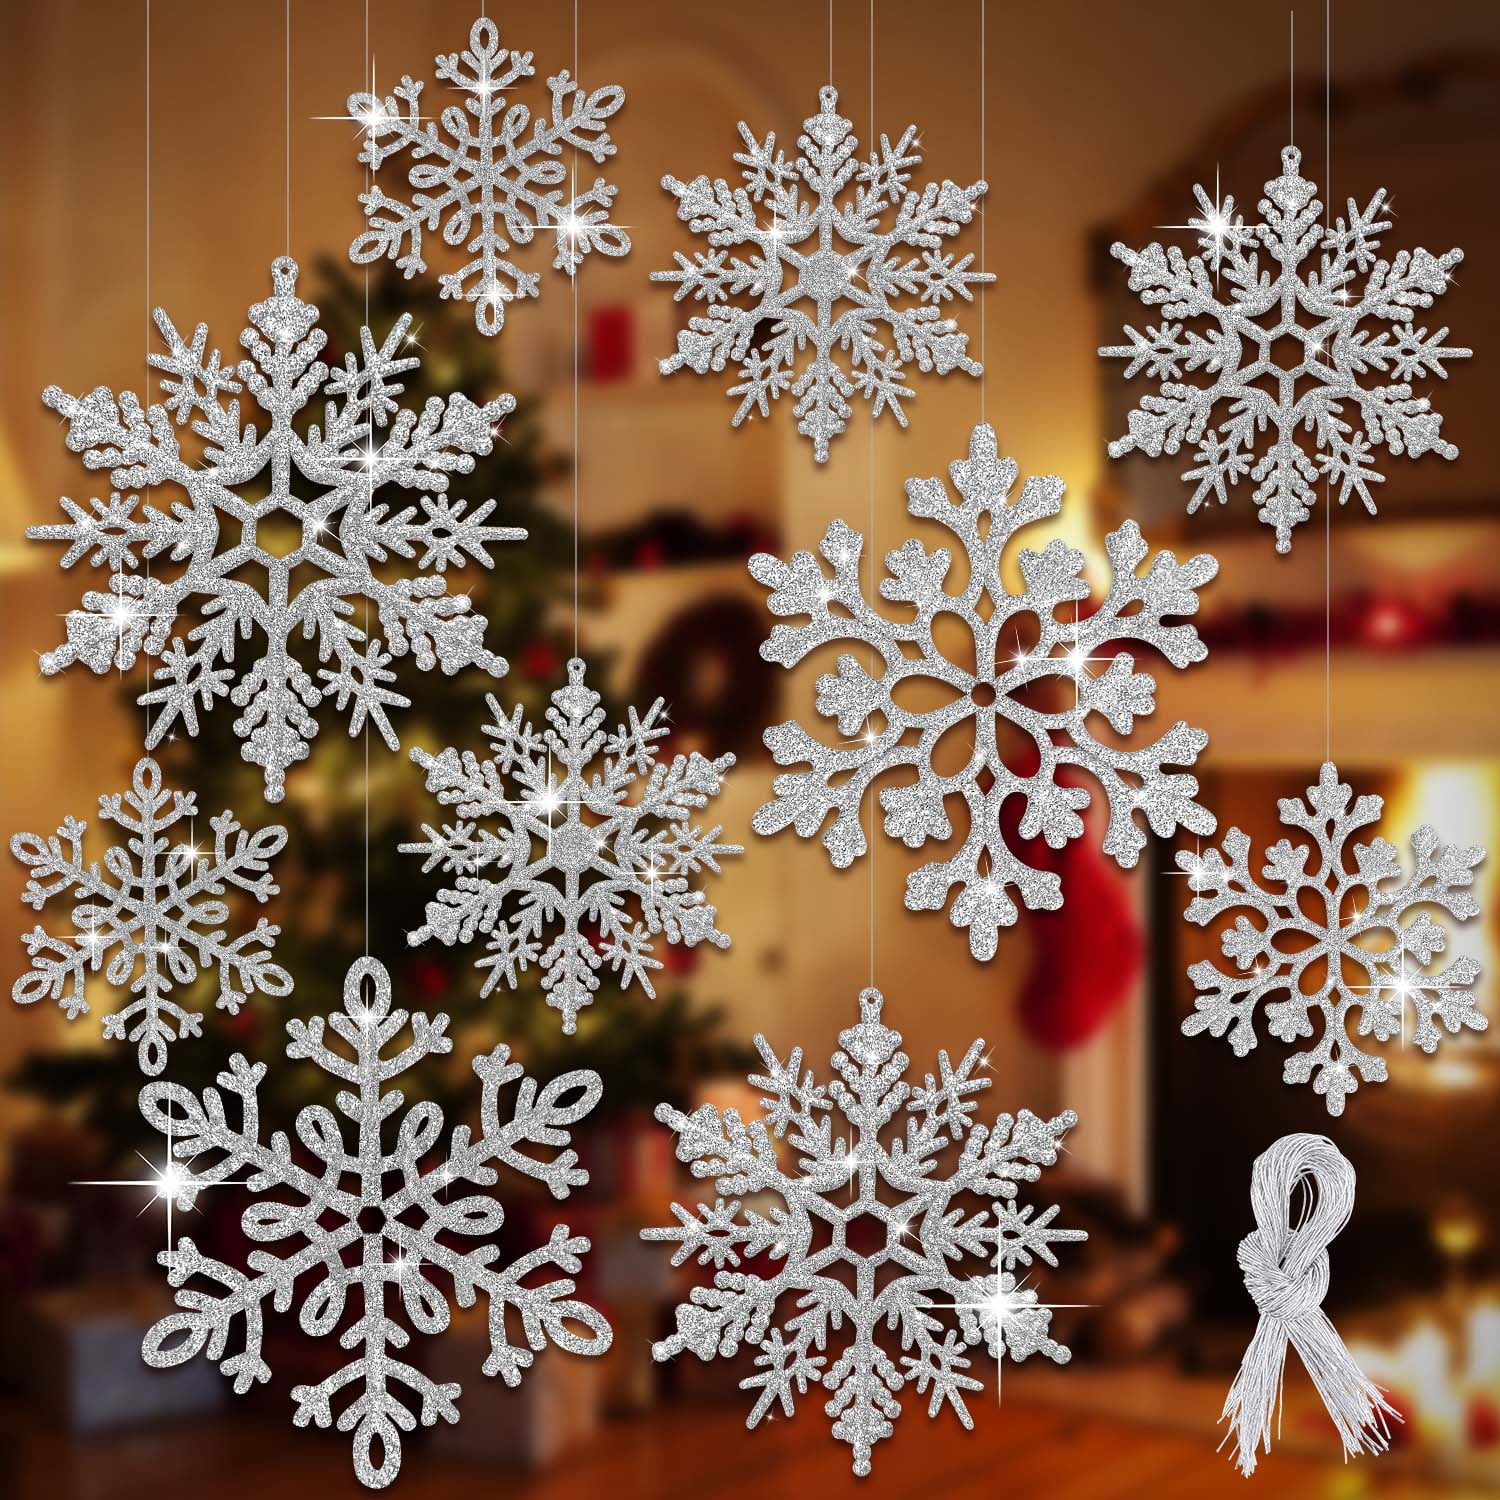 Ayieyill Christmas Snowflakes Large Snowflakes Ornaments 8 Pieces - 12 ...